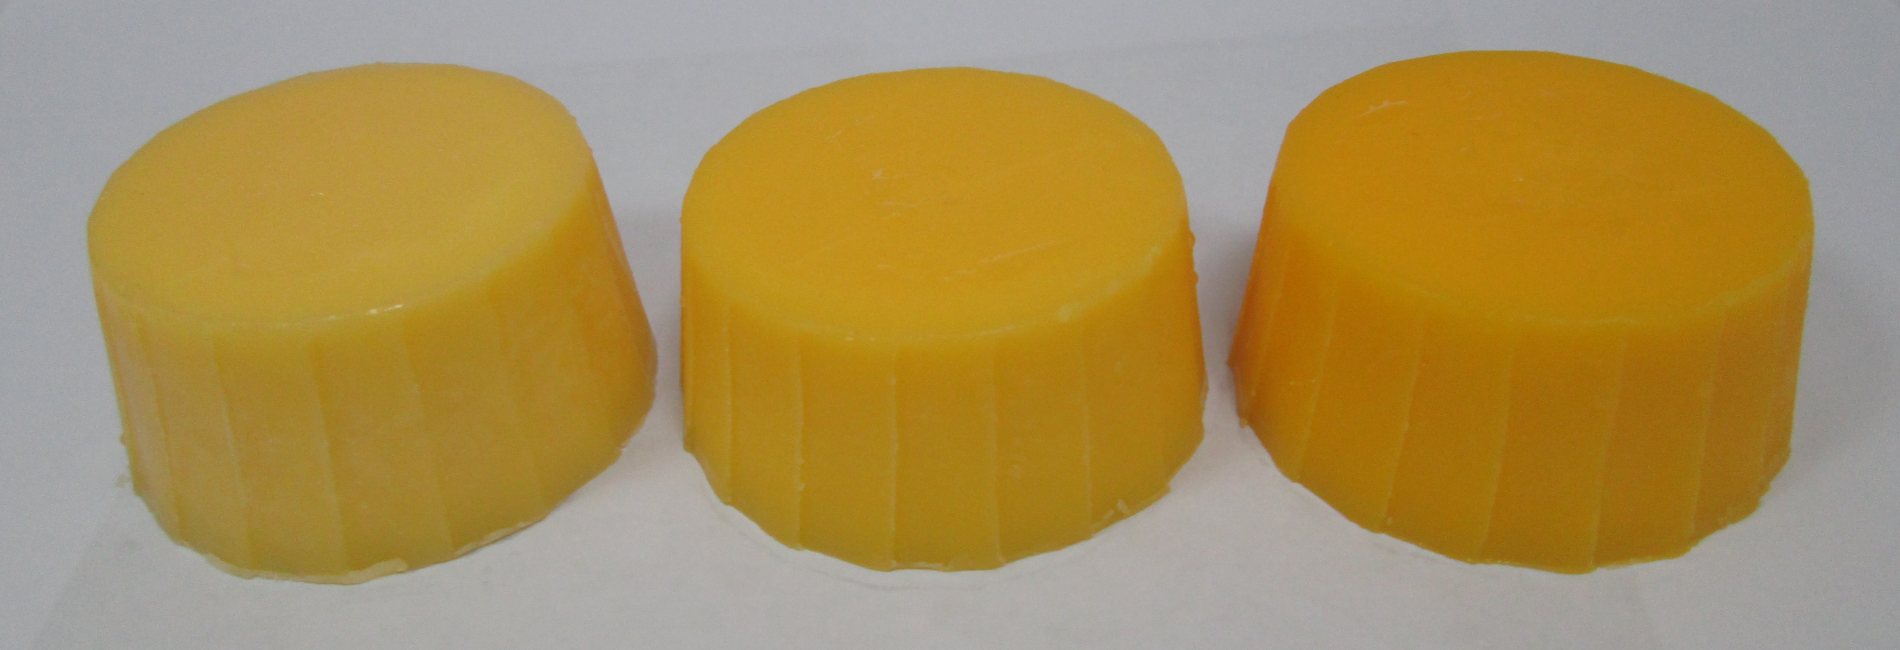 5, 10, 20 ppm in Hydrogenated Oil (from left to right)